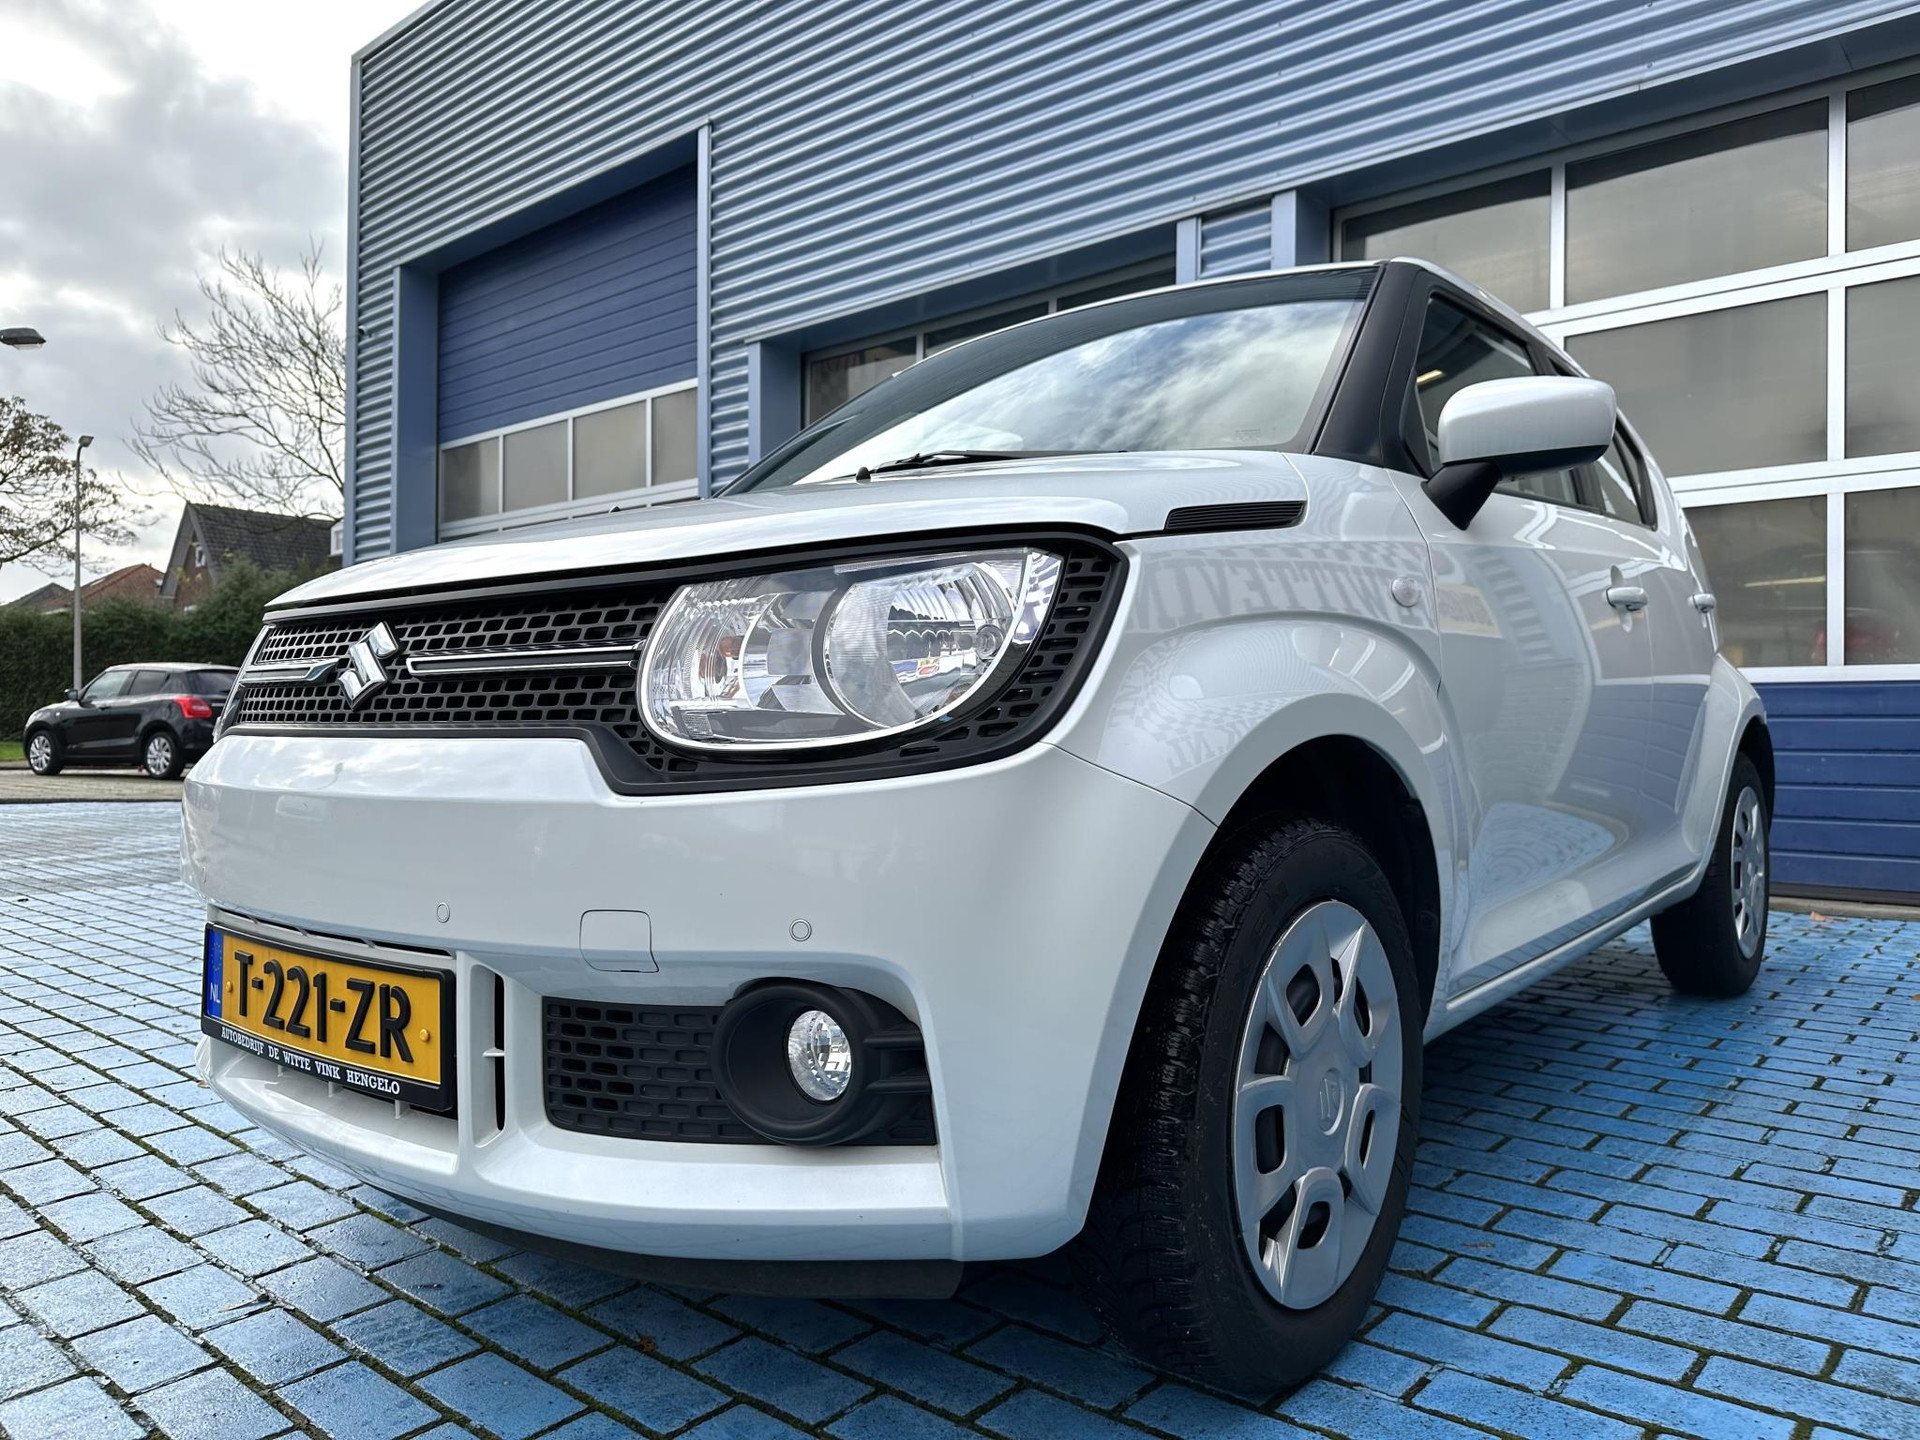 Suzuki Ignis 1.2 Comfort PDC V+A HOGE INSTAP AIRCO PDC BOVAG